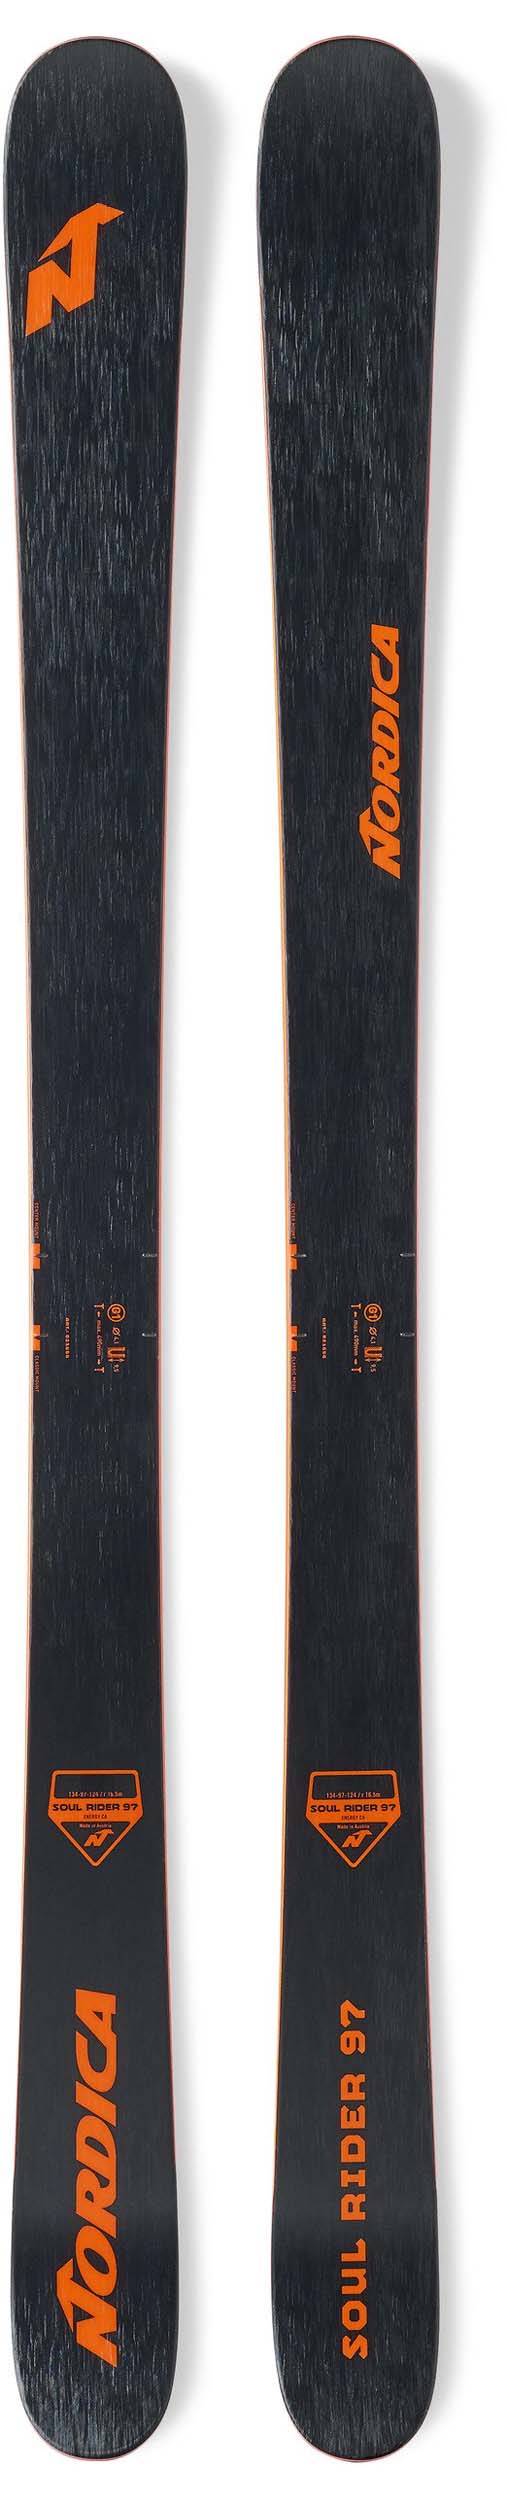 Nordica 2022 Soul Rider 97 Skis (Without Bindings / Flat) NEW !!  185cm